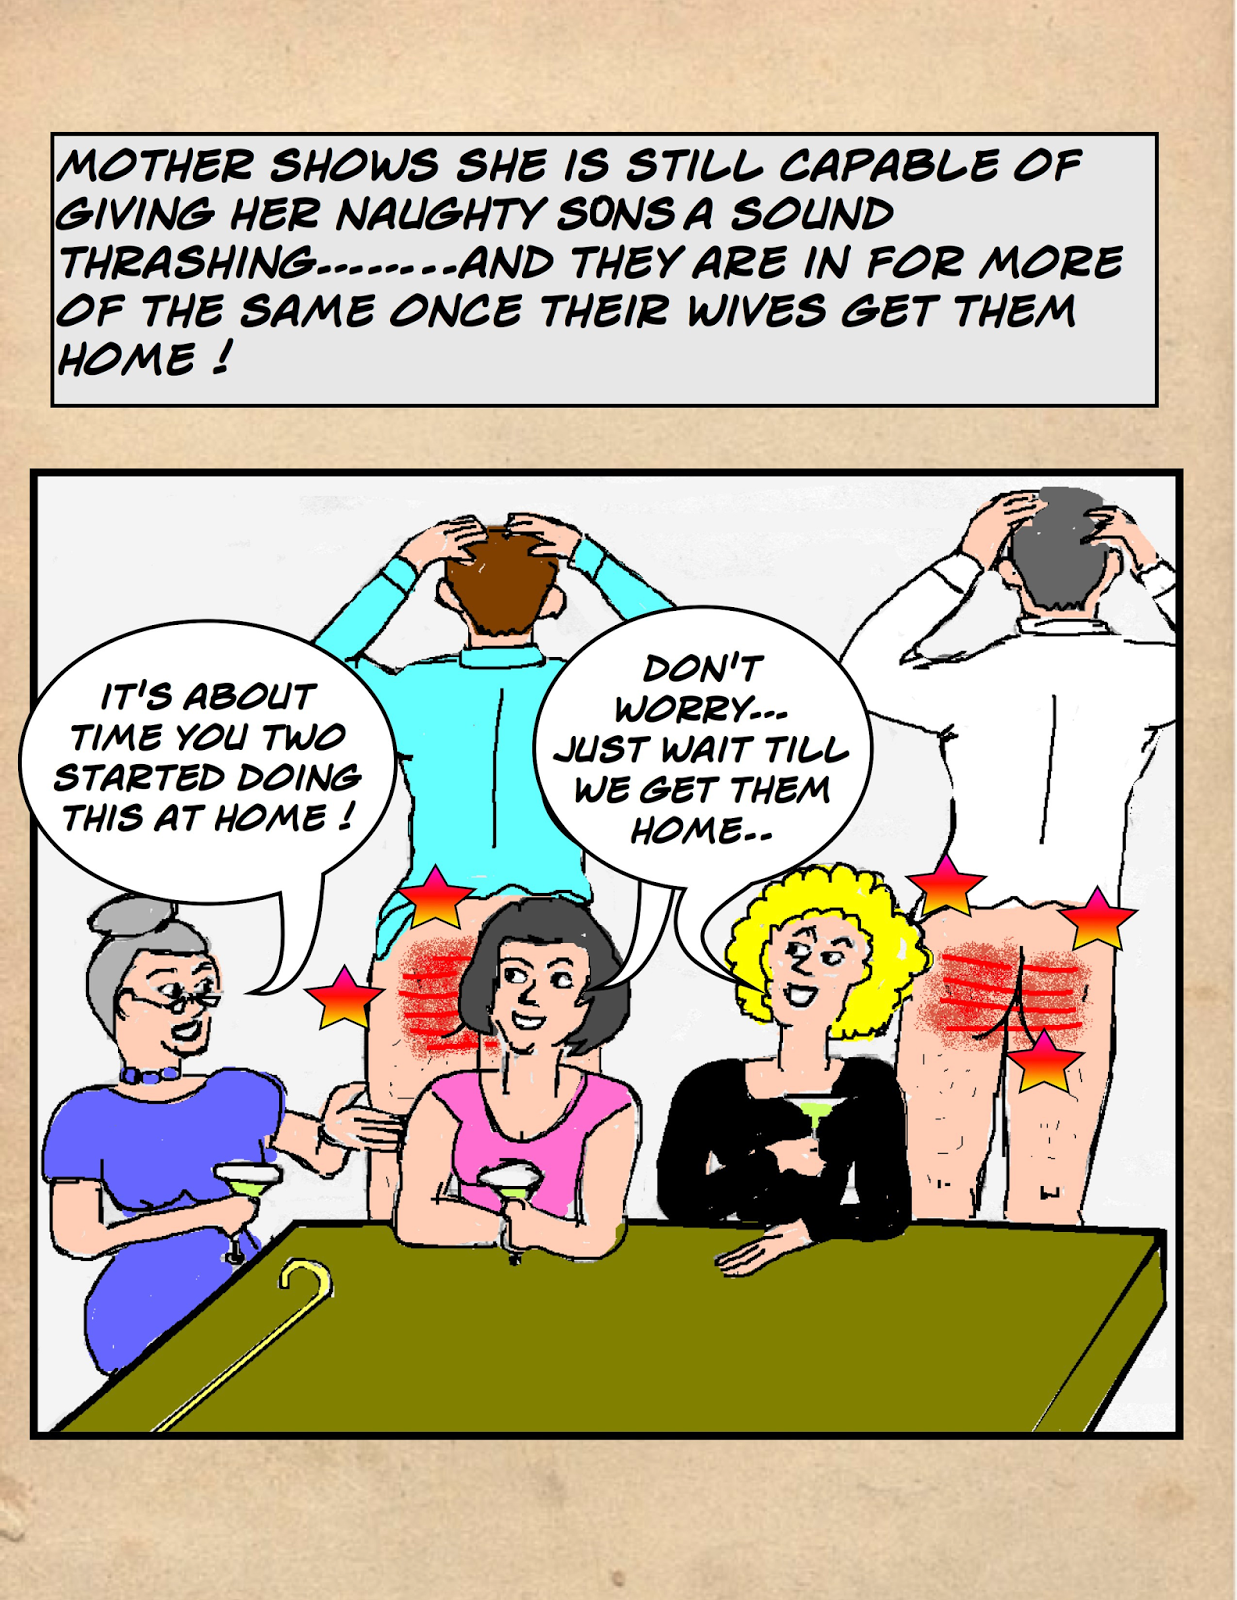 Spank daughter in law stories